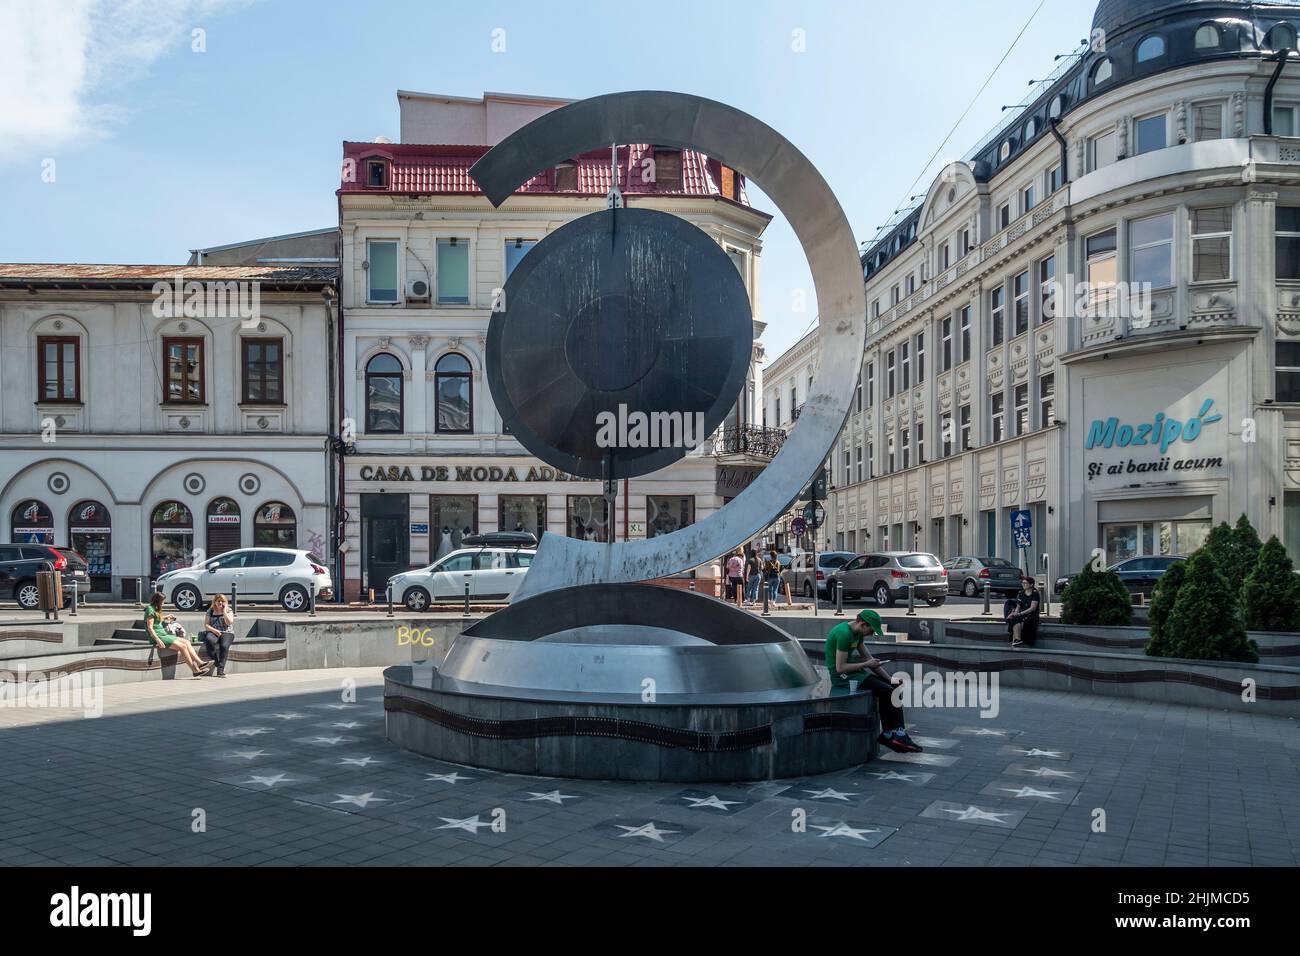 Thalia's Gong, a celebration of 200 years of theatre in Bucharest, Romania. Stars around the base to commemorate well-known Romanian actors. Stock Photo